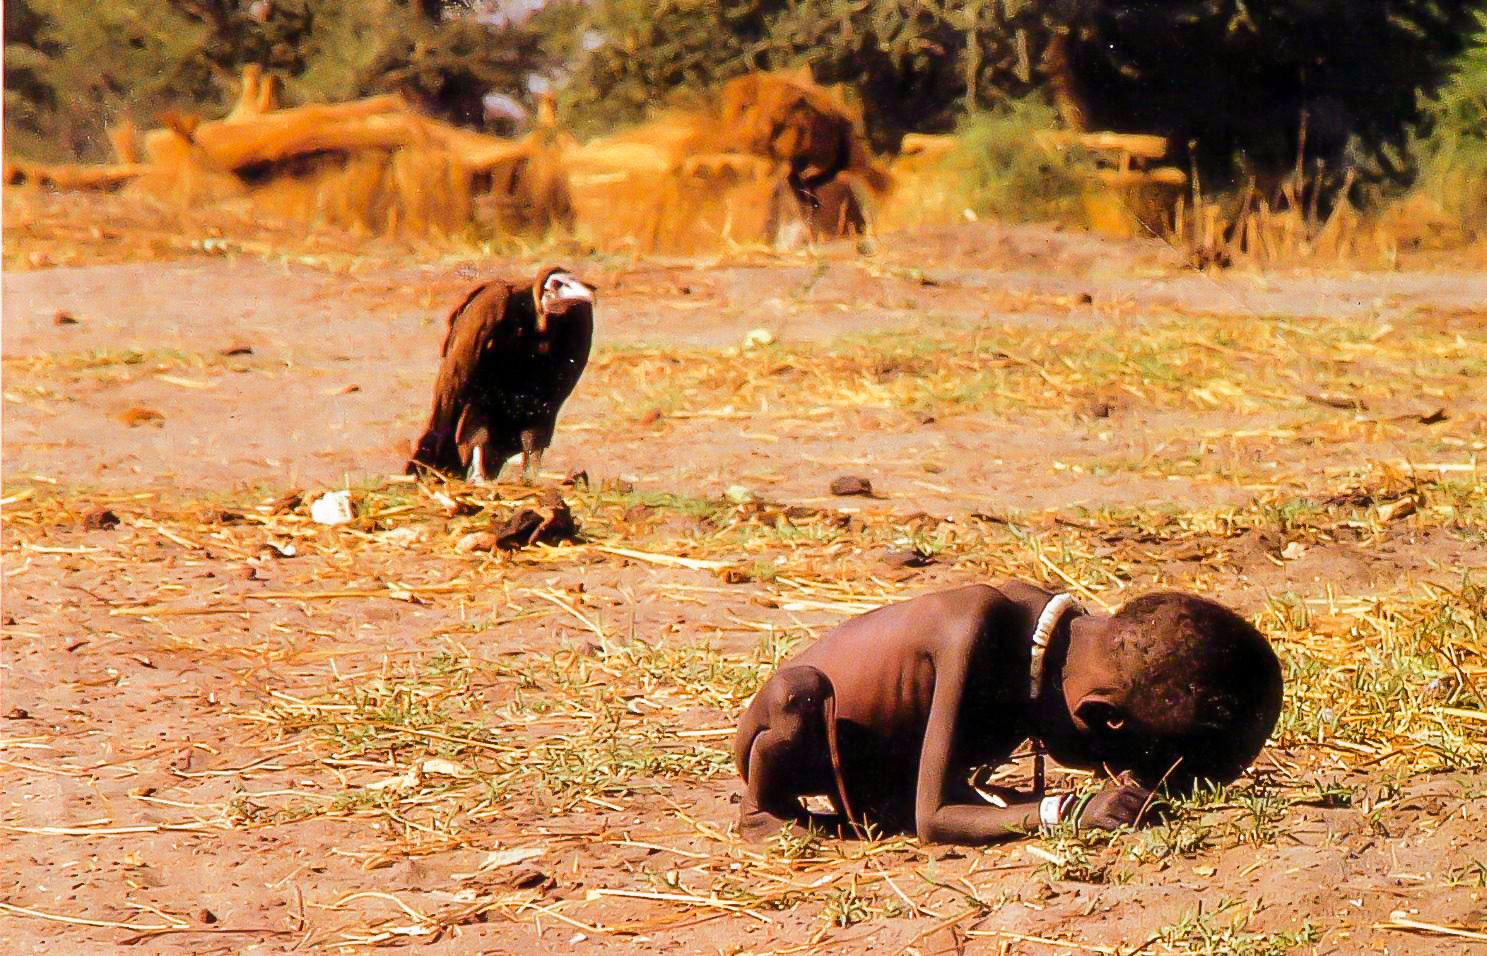 kevin carter photo gallery